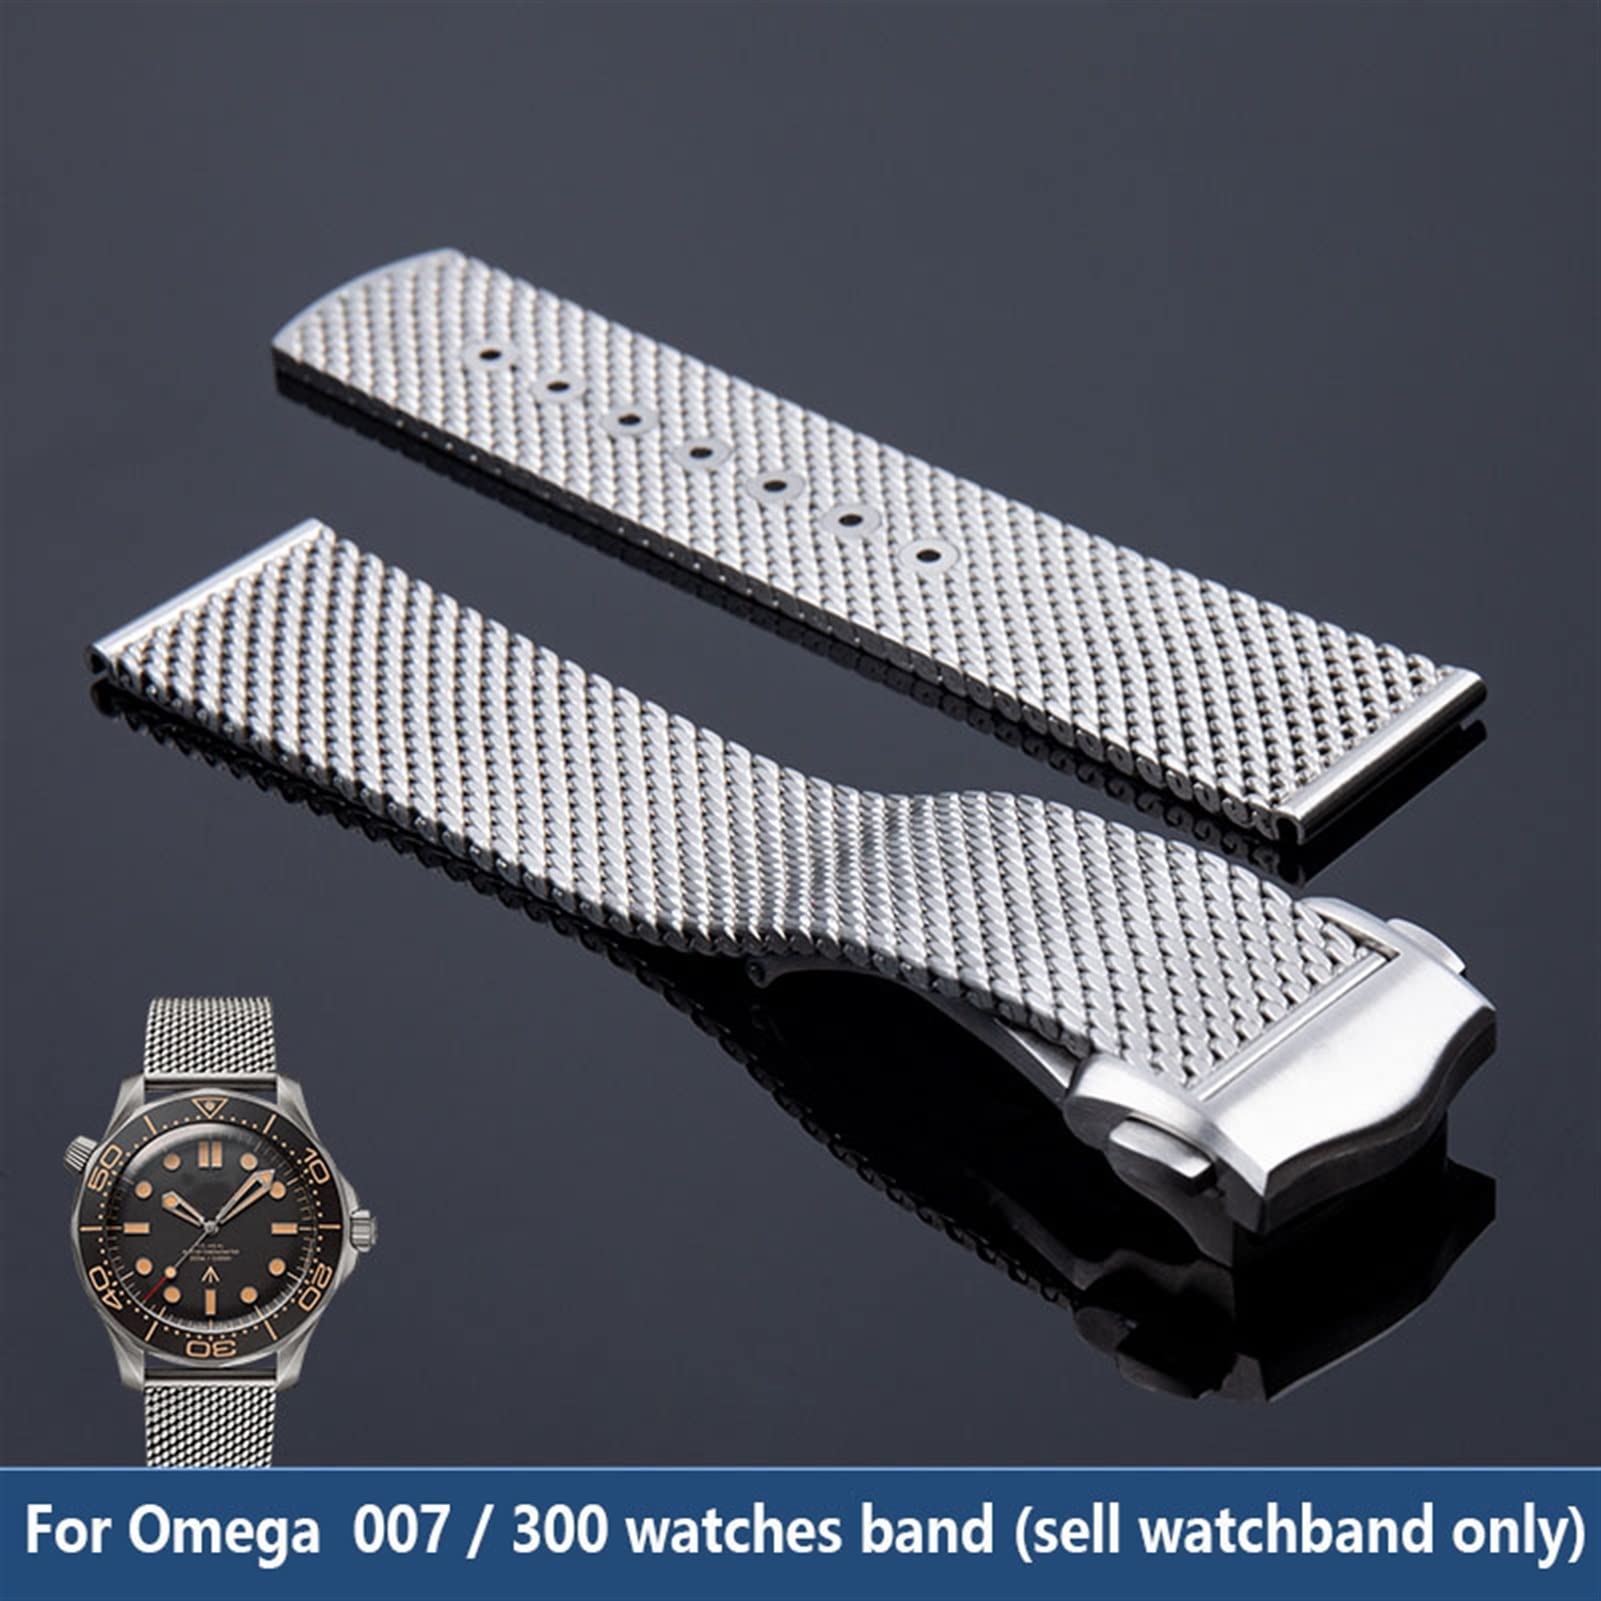 HAODEE Titanium Steel 20mm Chain Strap for Omega 007 Seamaster Diver 300 Watch Band Replace Milanese Stainless Bracelet